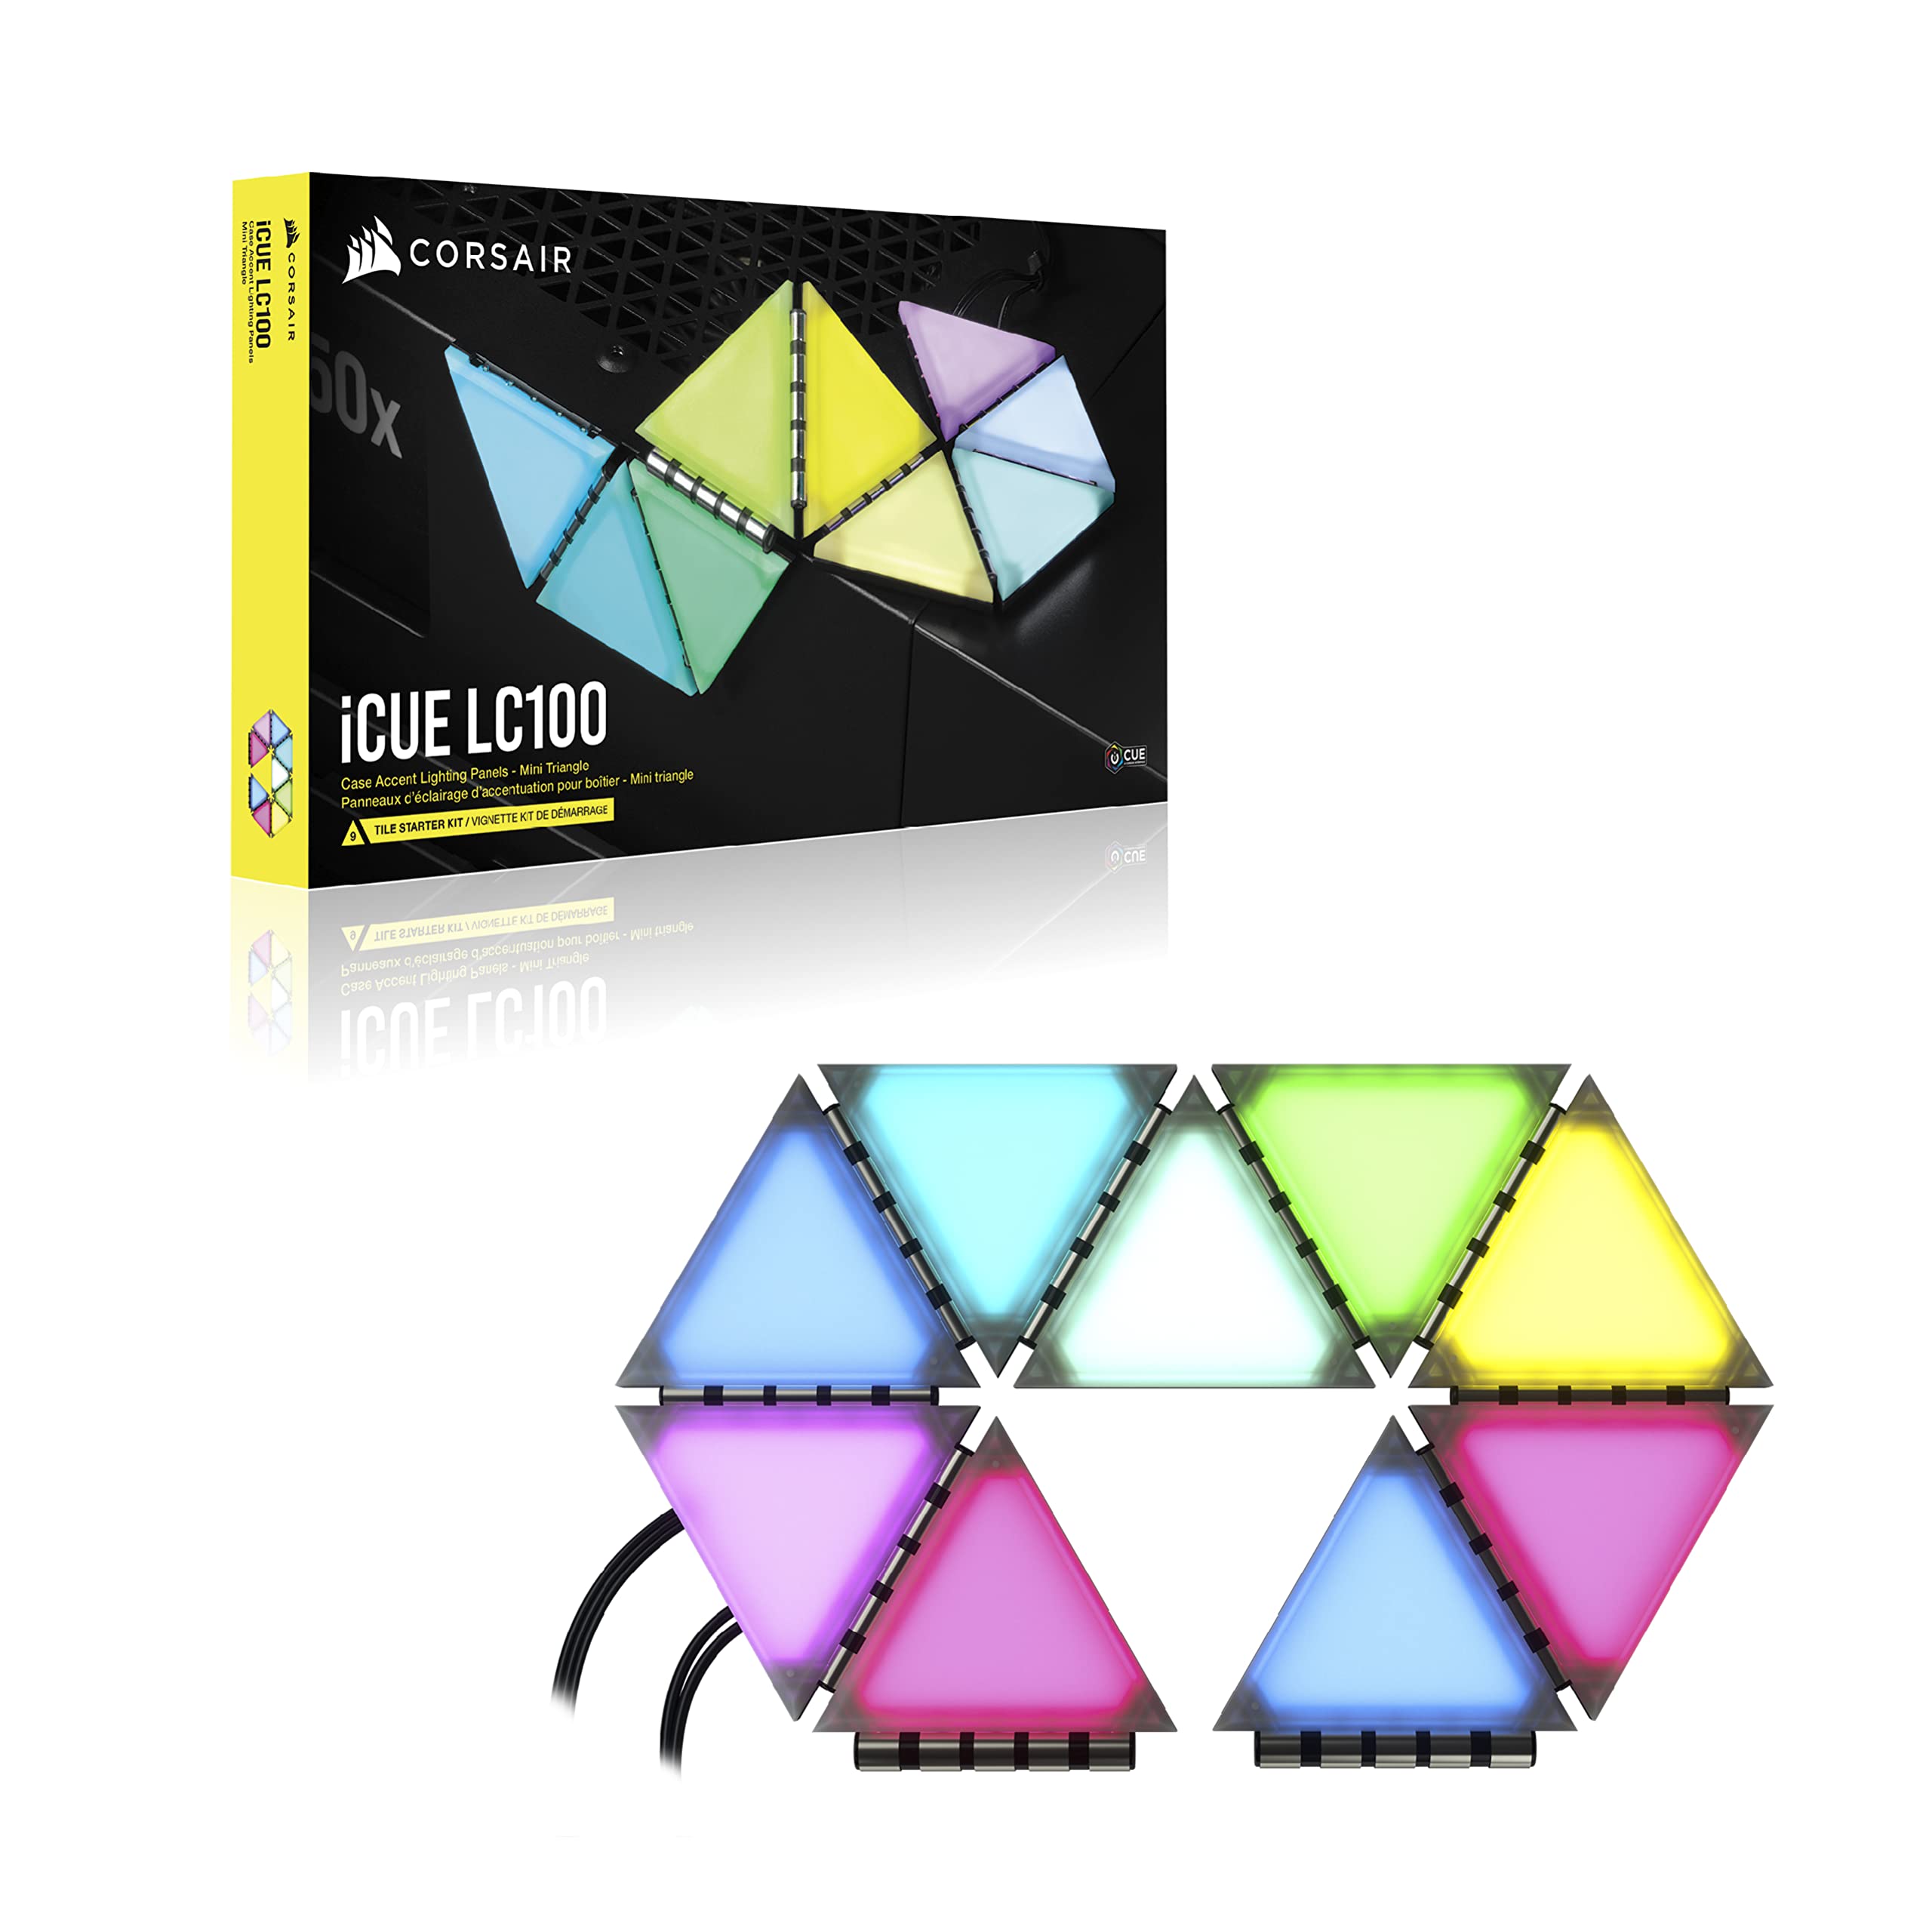 Corsair iCUE LC100 Mini Triangle Case Accent Lighting Panels Starter Kit w/ 9x Magnetic Tiles & iCUE Lighting Node Pro Controller $25 + Free Shipping w/ Prime or on $35+